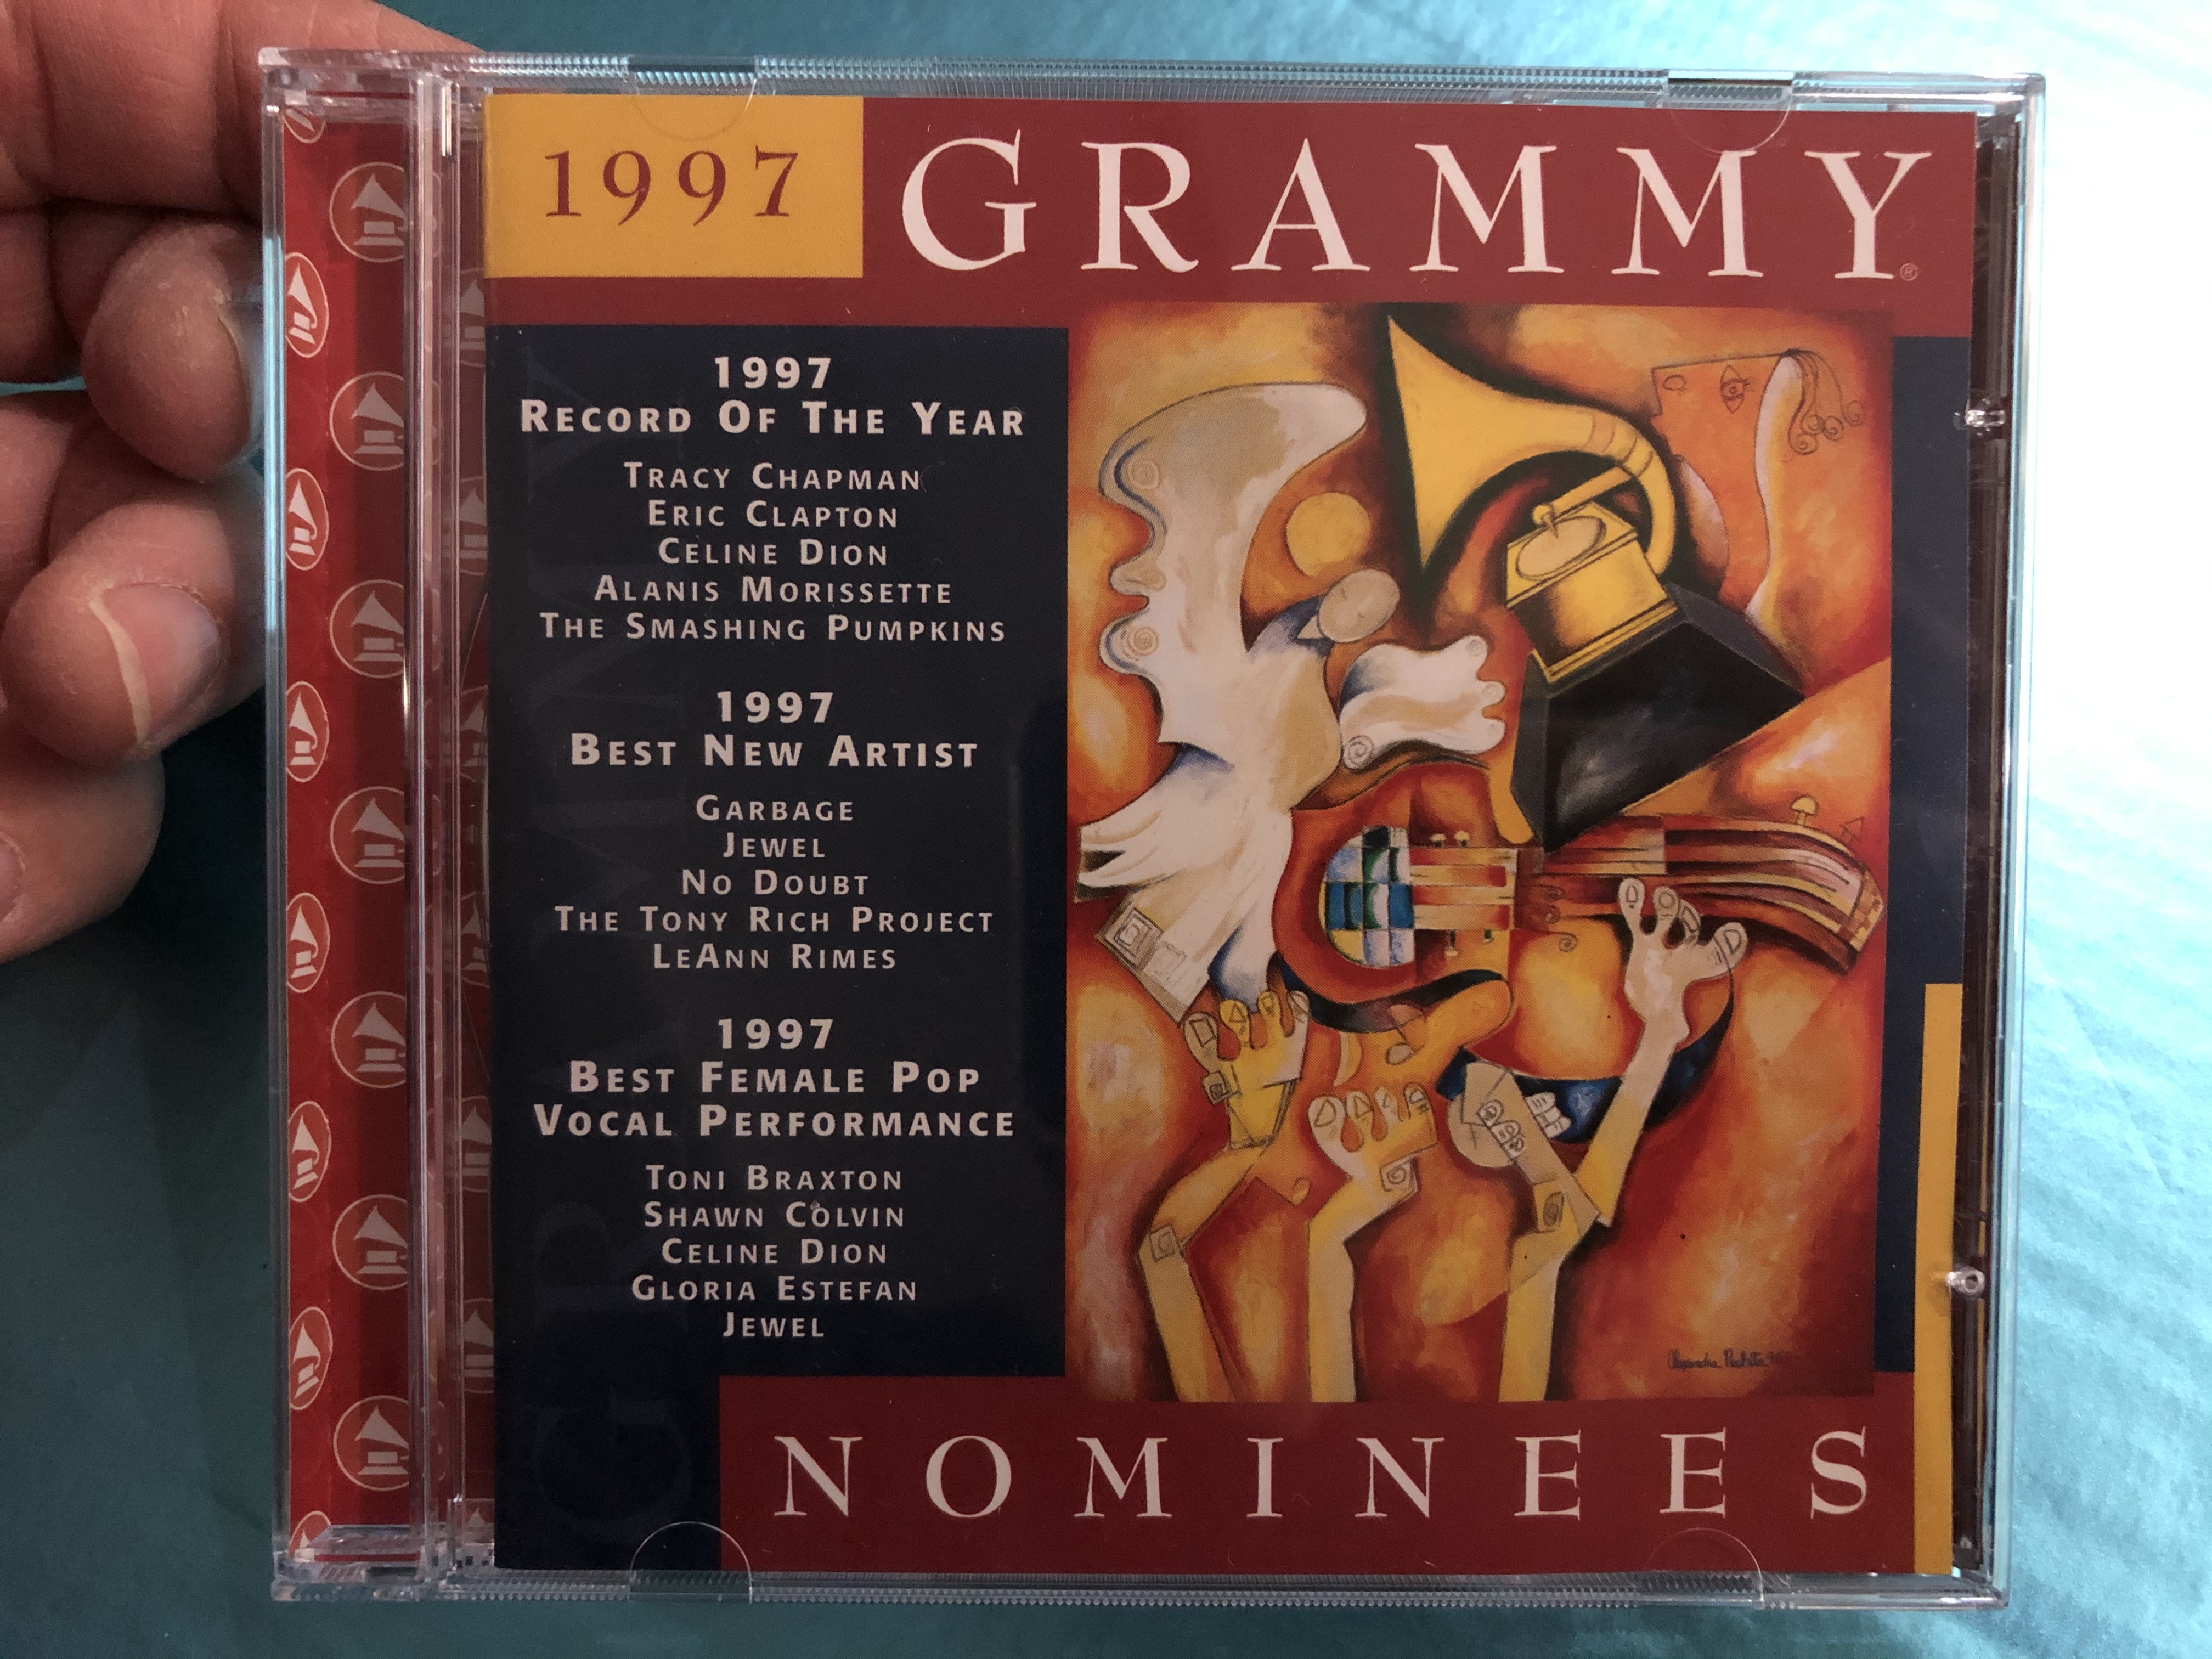 1997-grammy-nominees-1997-record-of-the-year-tracy-chapman-eric-clapton-celine-dion-alanis-morissette-the-smashing-pumpkins-1997-best-new-artist-garbage-jewel-no-doubt-grammy-recordin-1-.jpg